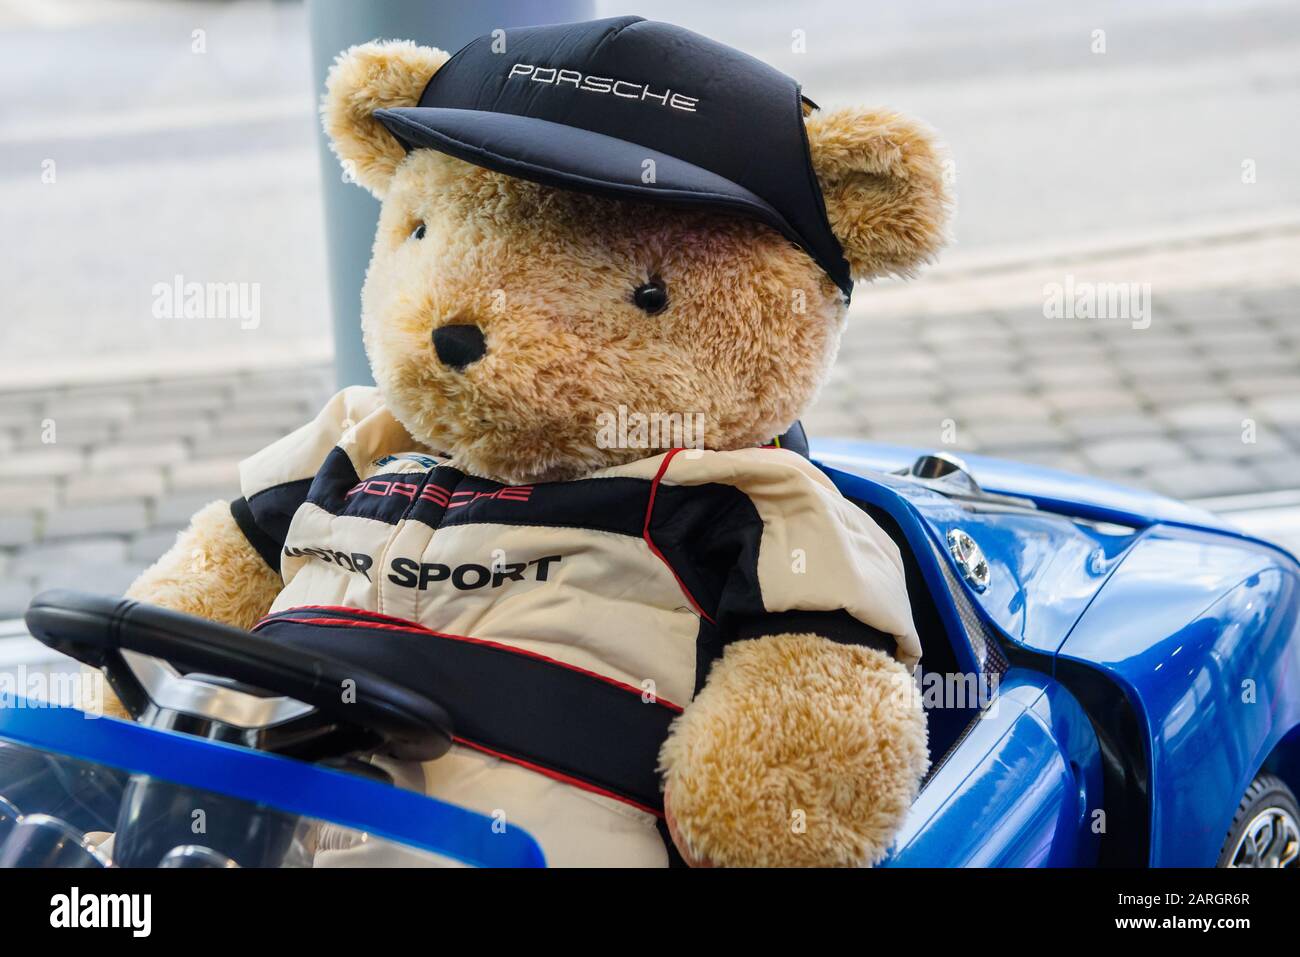 RIGA, LATVIA. 22nd January 2020. Teddy bear toy at Porsche toy car. Porsche is a German automobile manufacturer specializing in high-performance sports cars, SUVs and sedans. Stock Photo